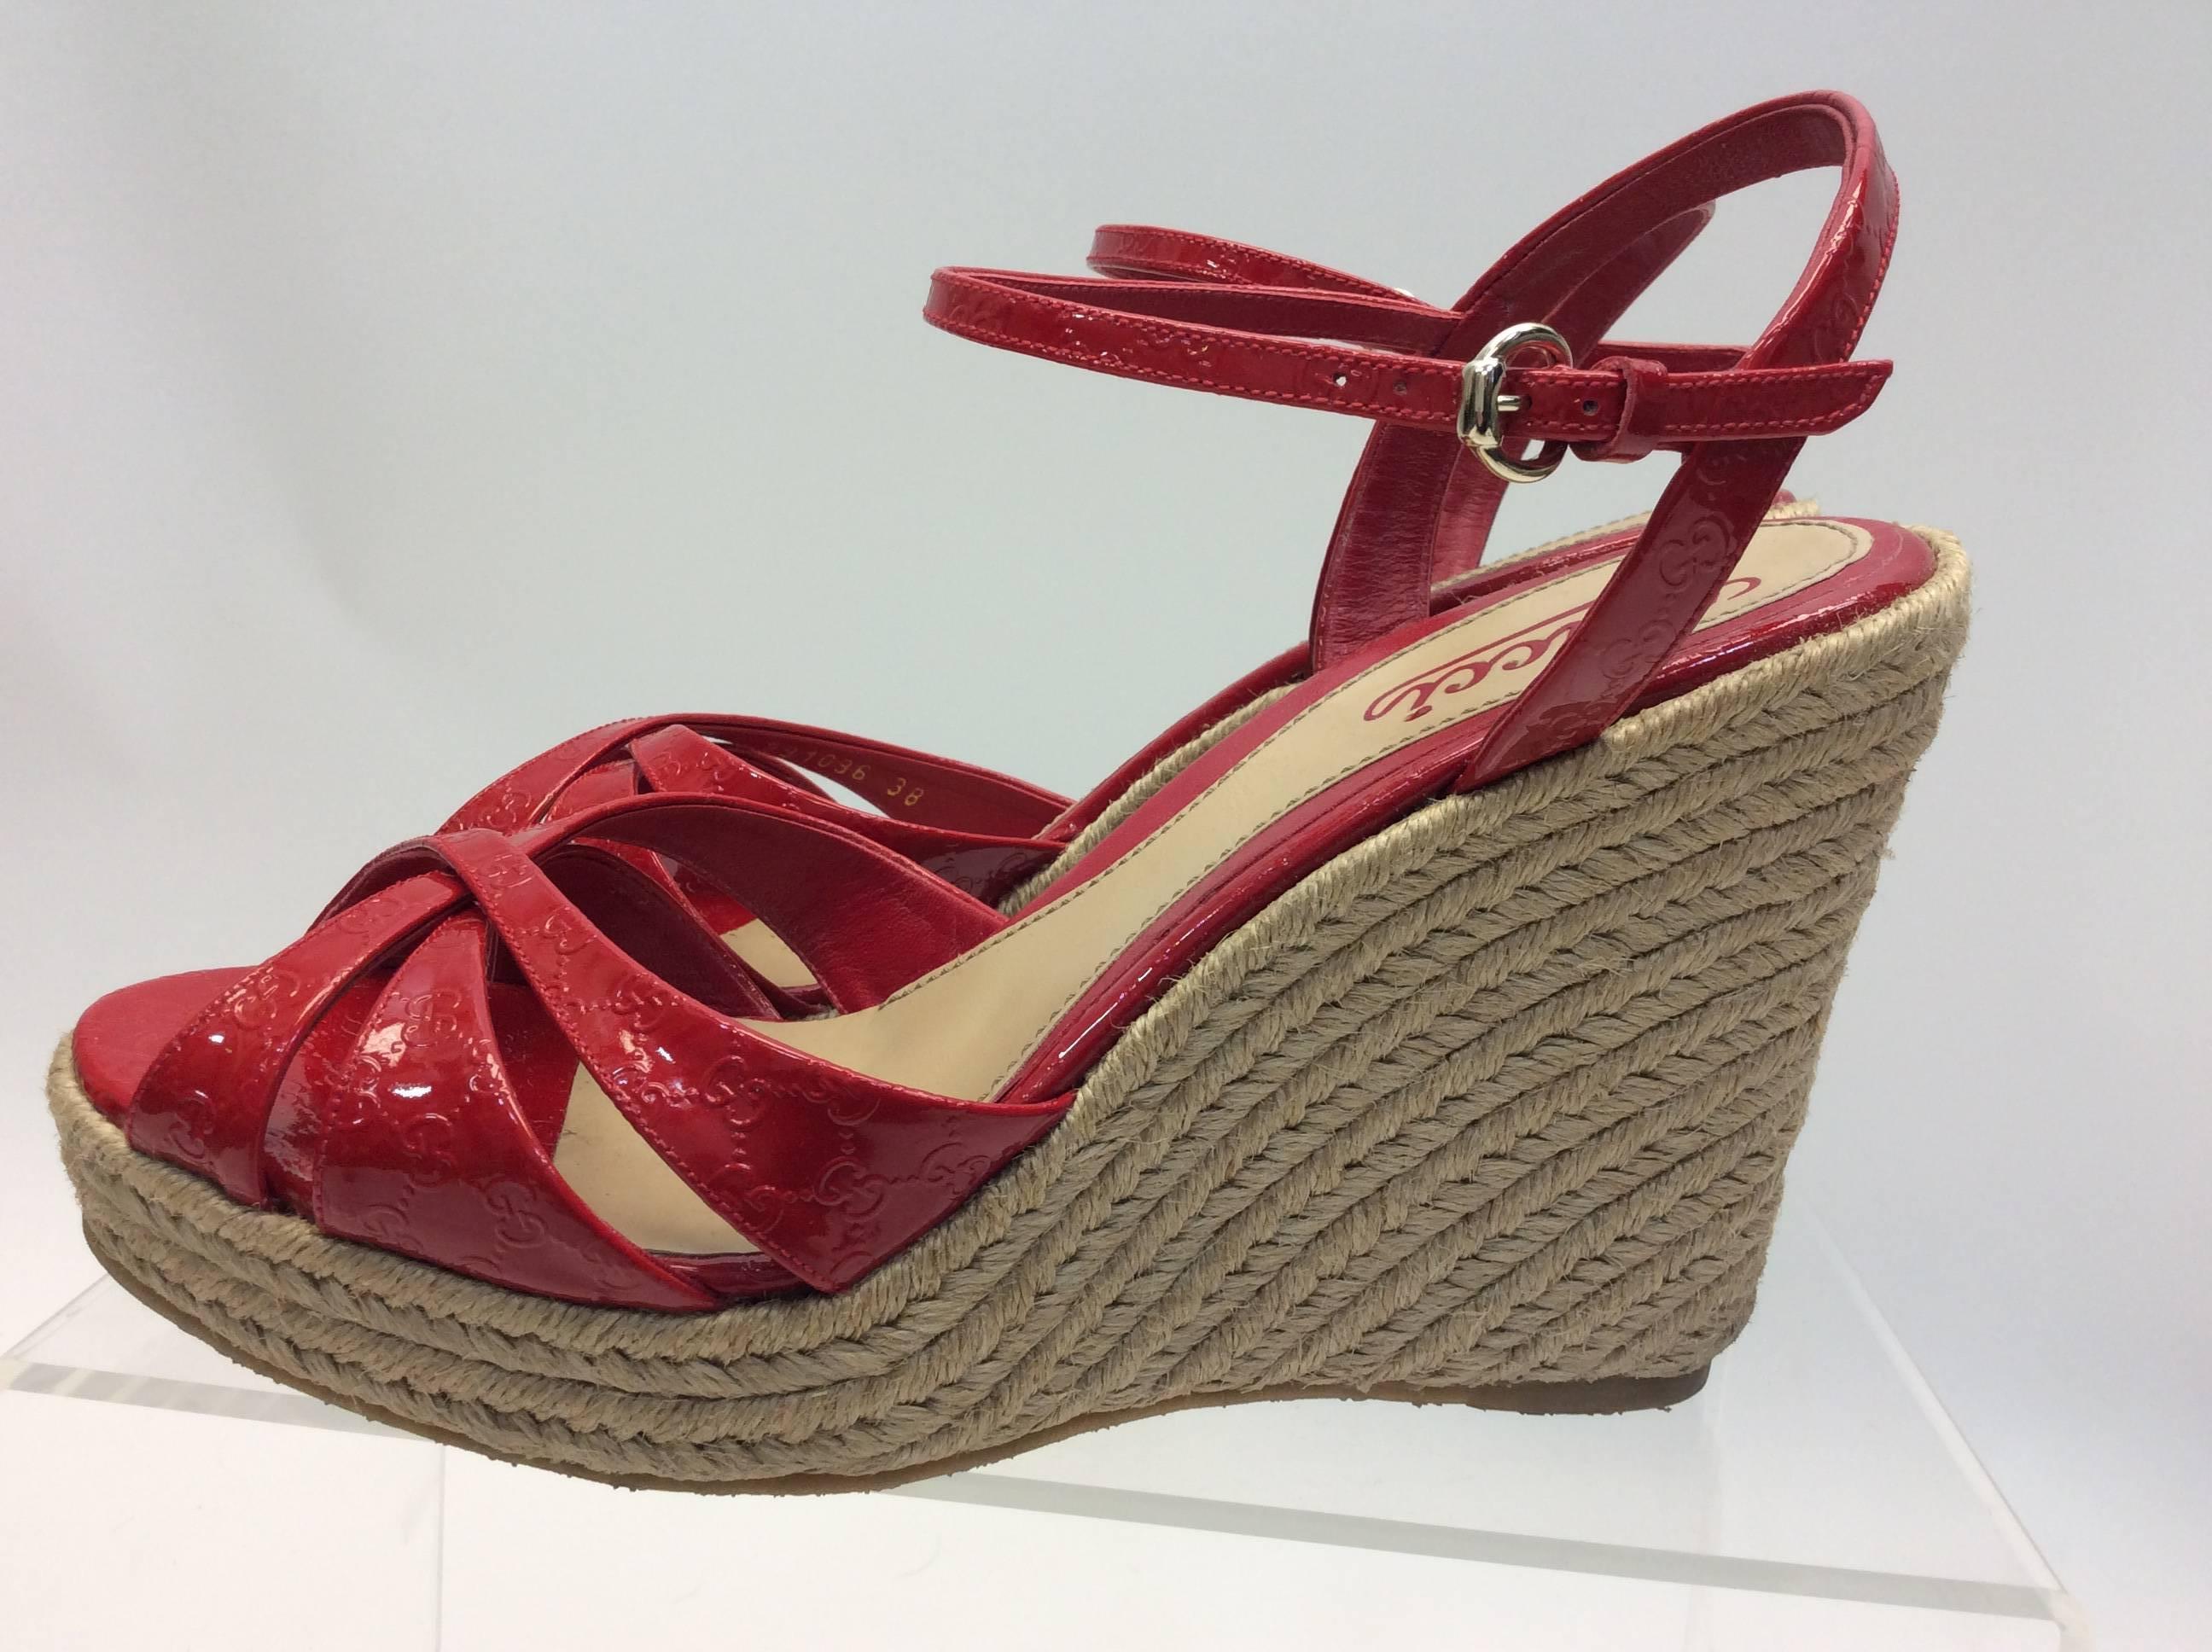 Gucci Red Patent Leather Wedge
$299
Made in Spain
Size 38
4.5